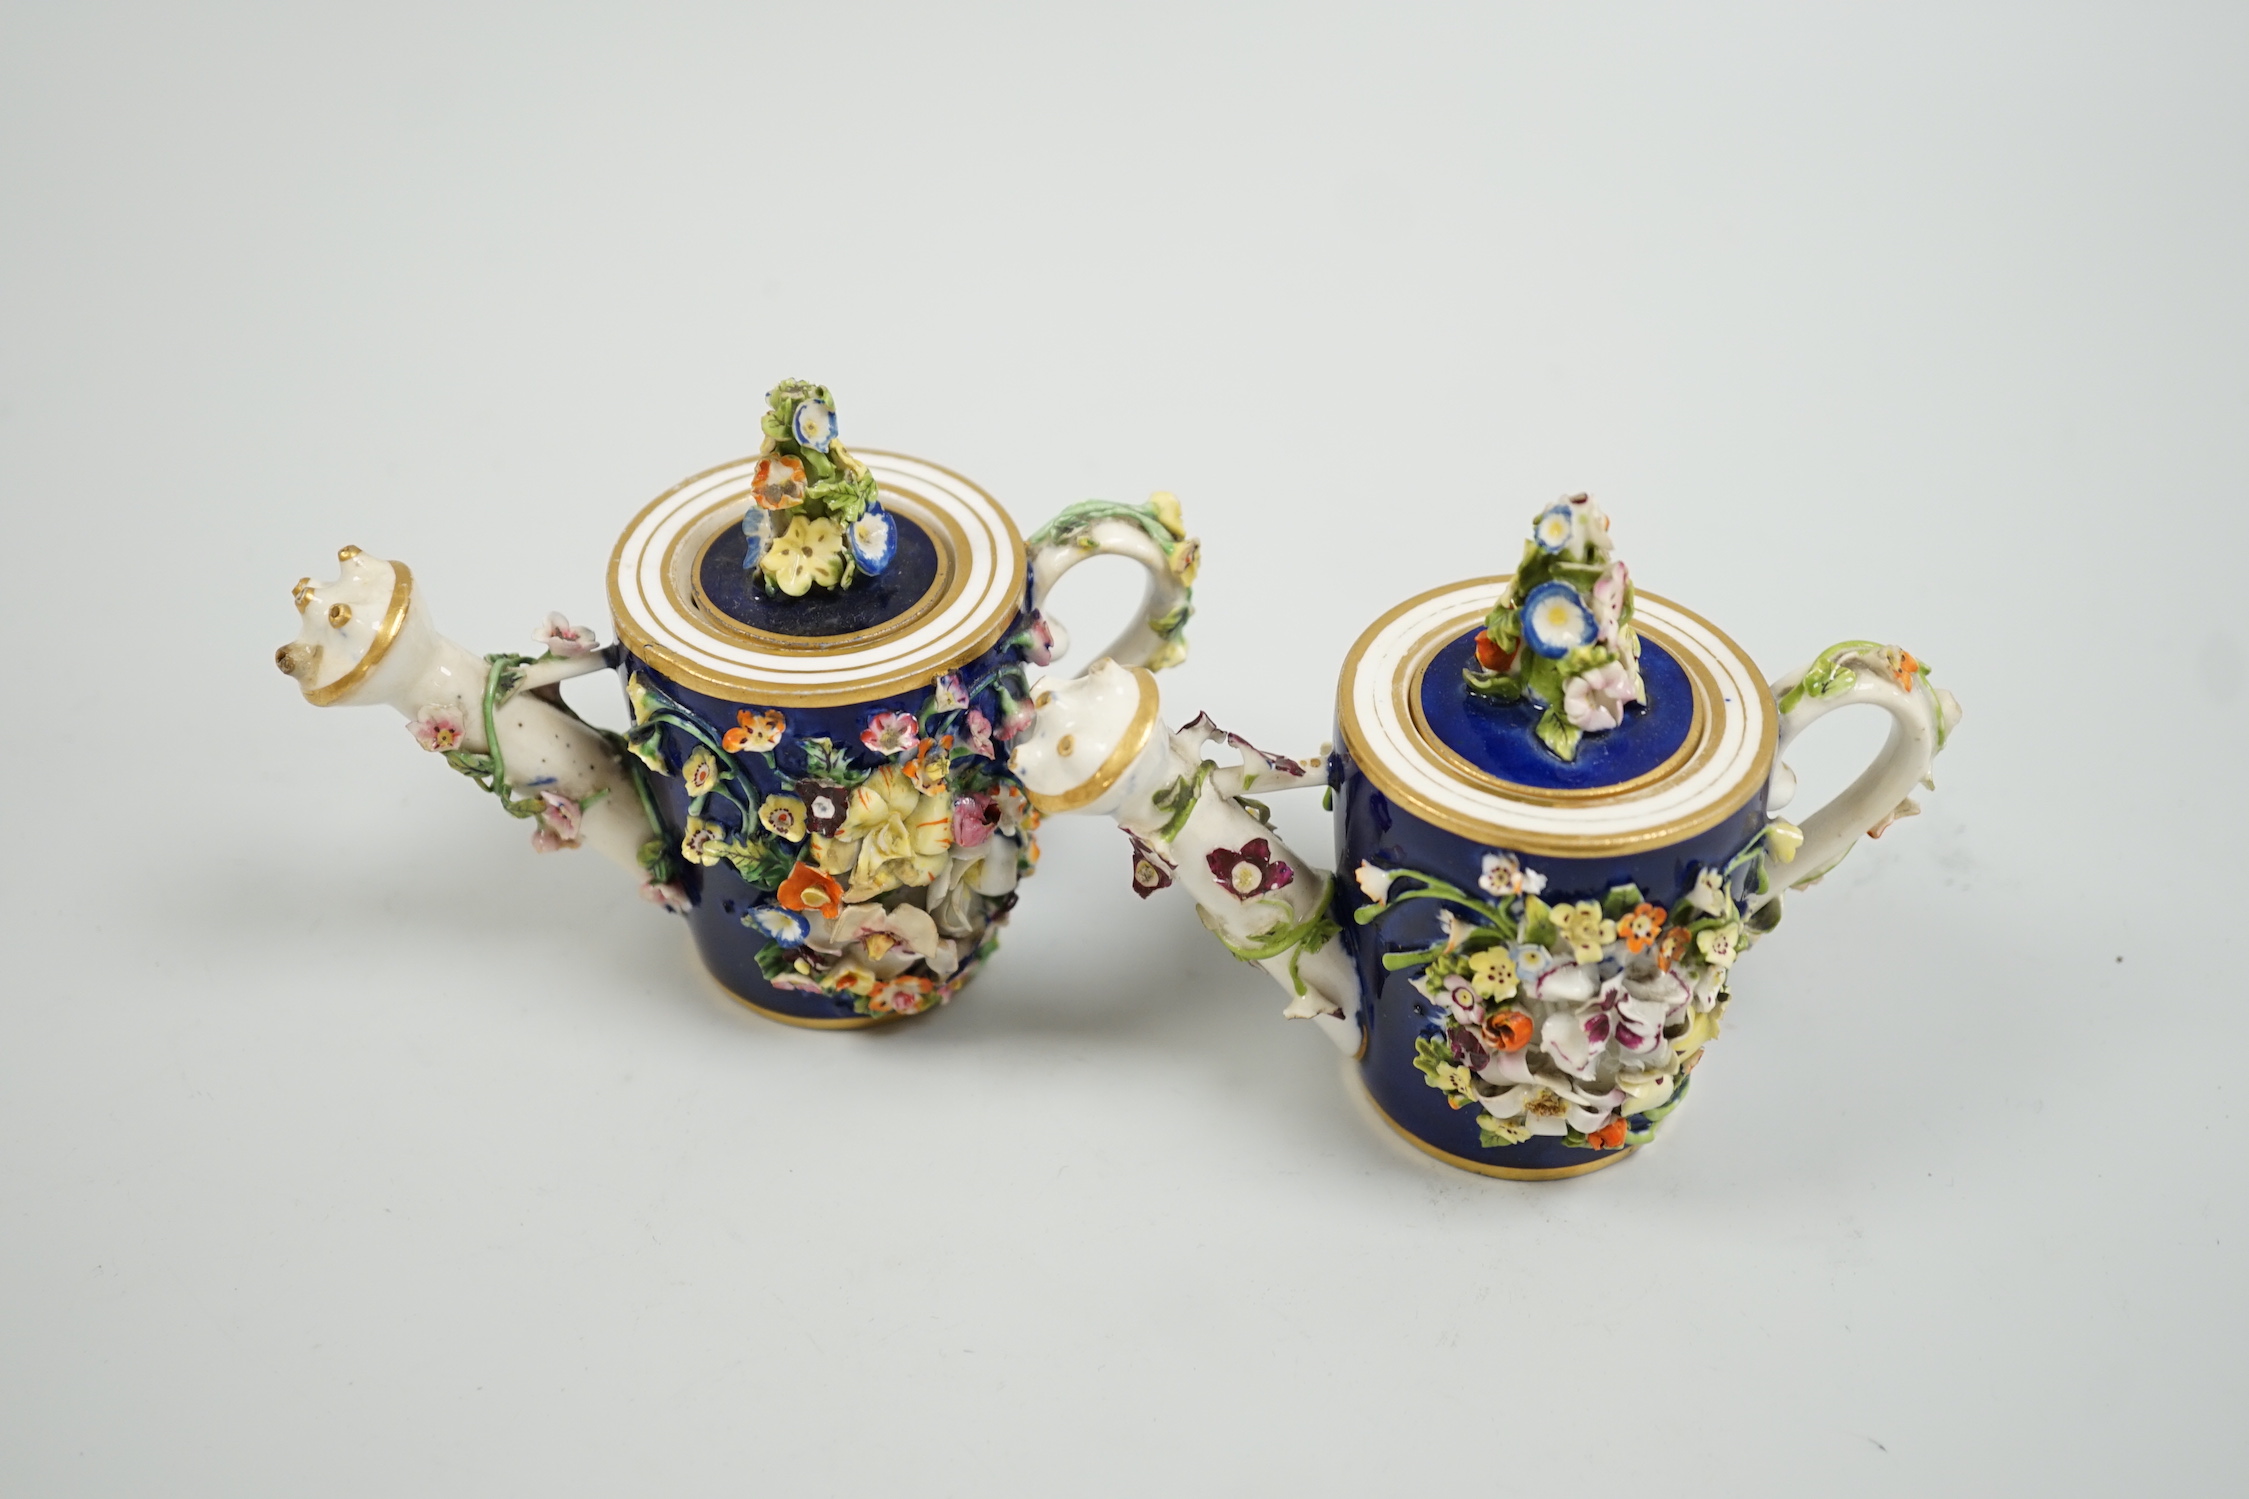 Toy porcelain. Two Bloor Derby flower encrusted rosewater sprinklers, each modelled as a watering can, c.1825, red printed marks, 9cm high